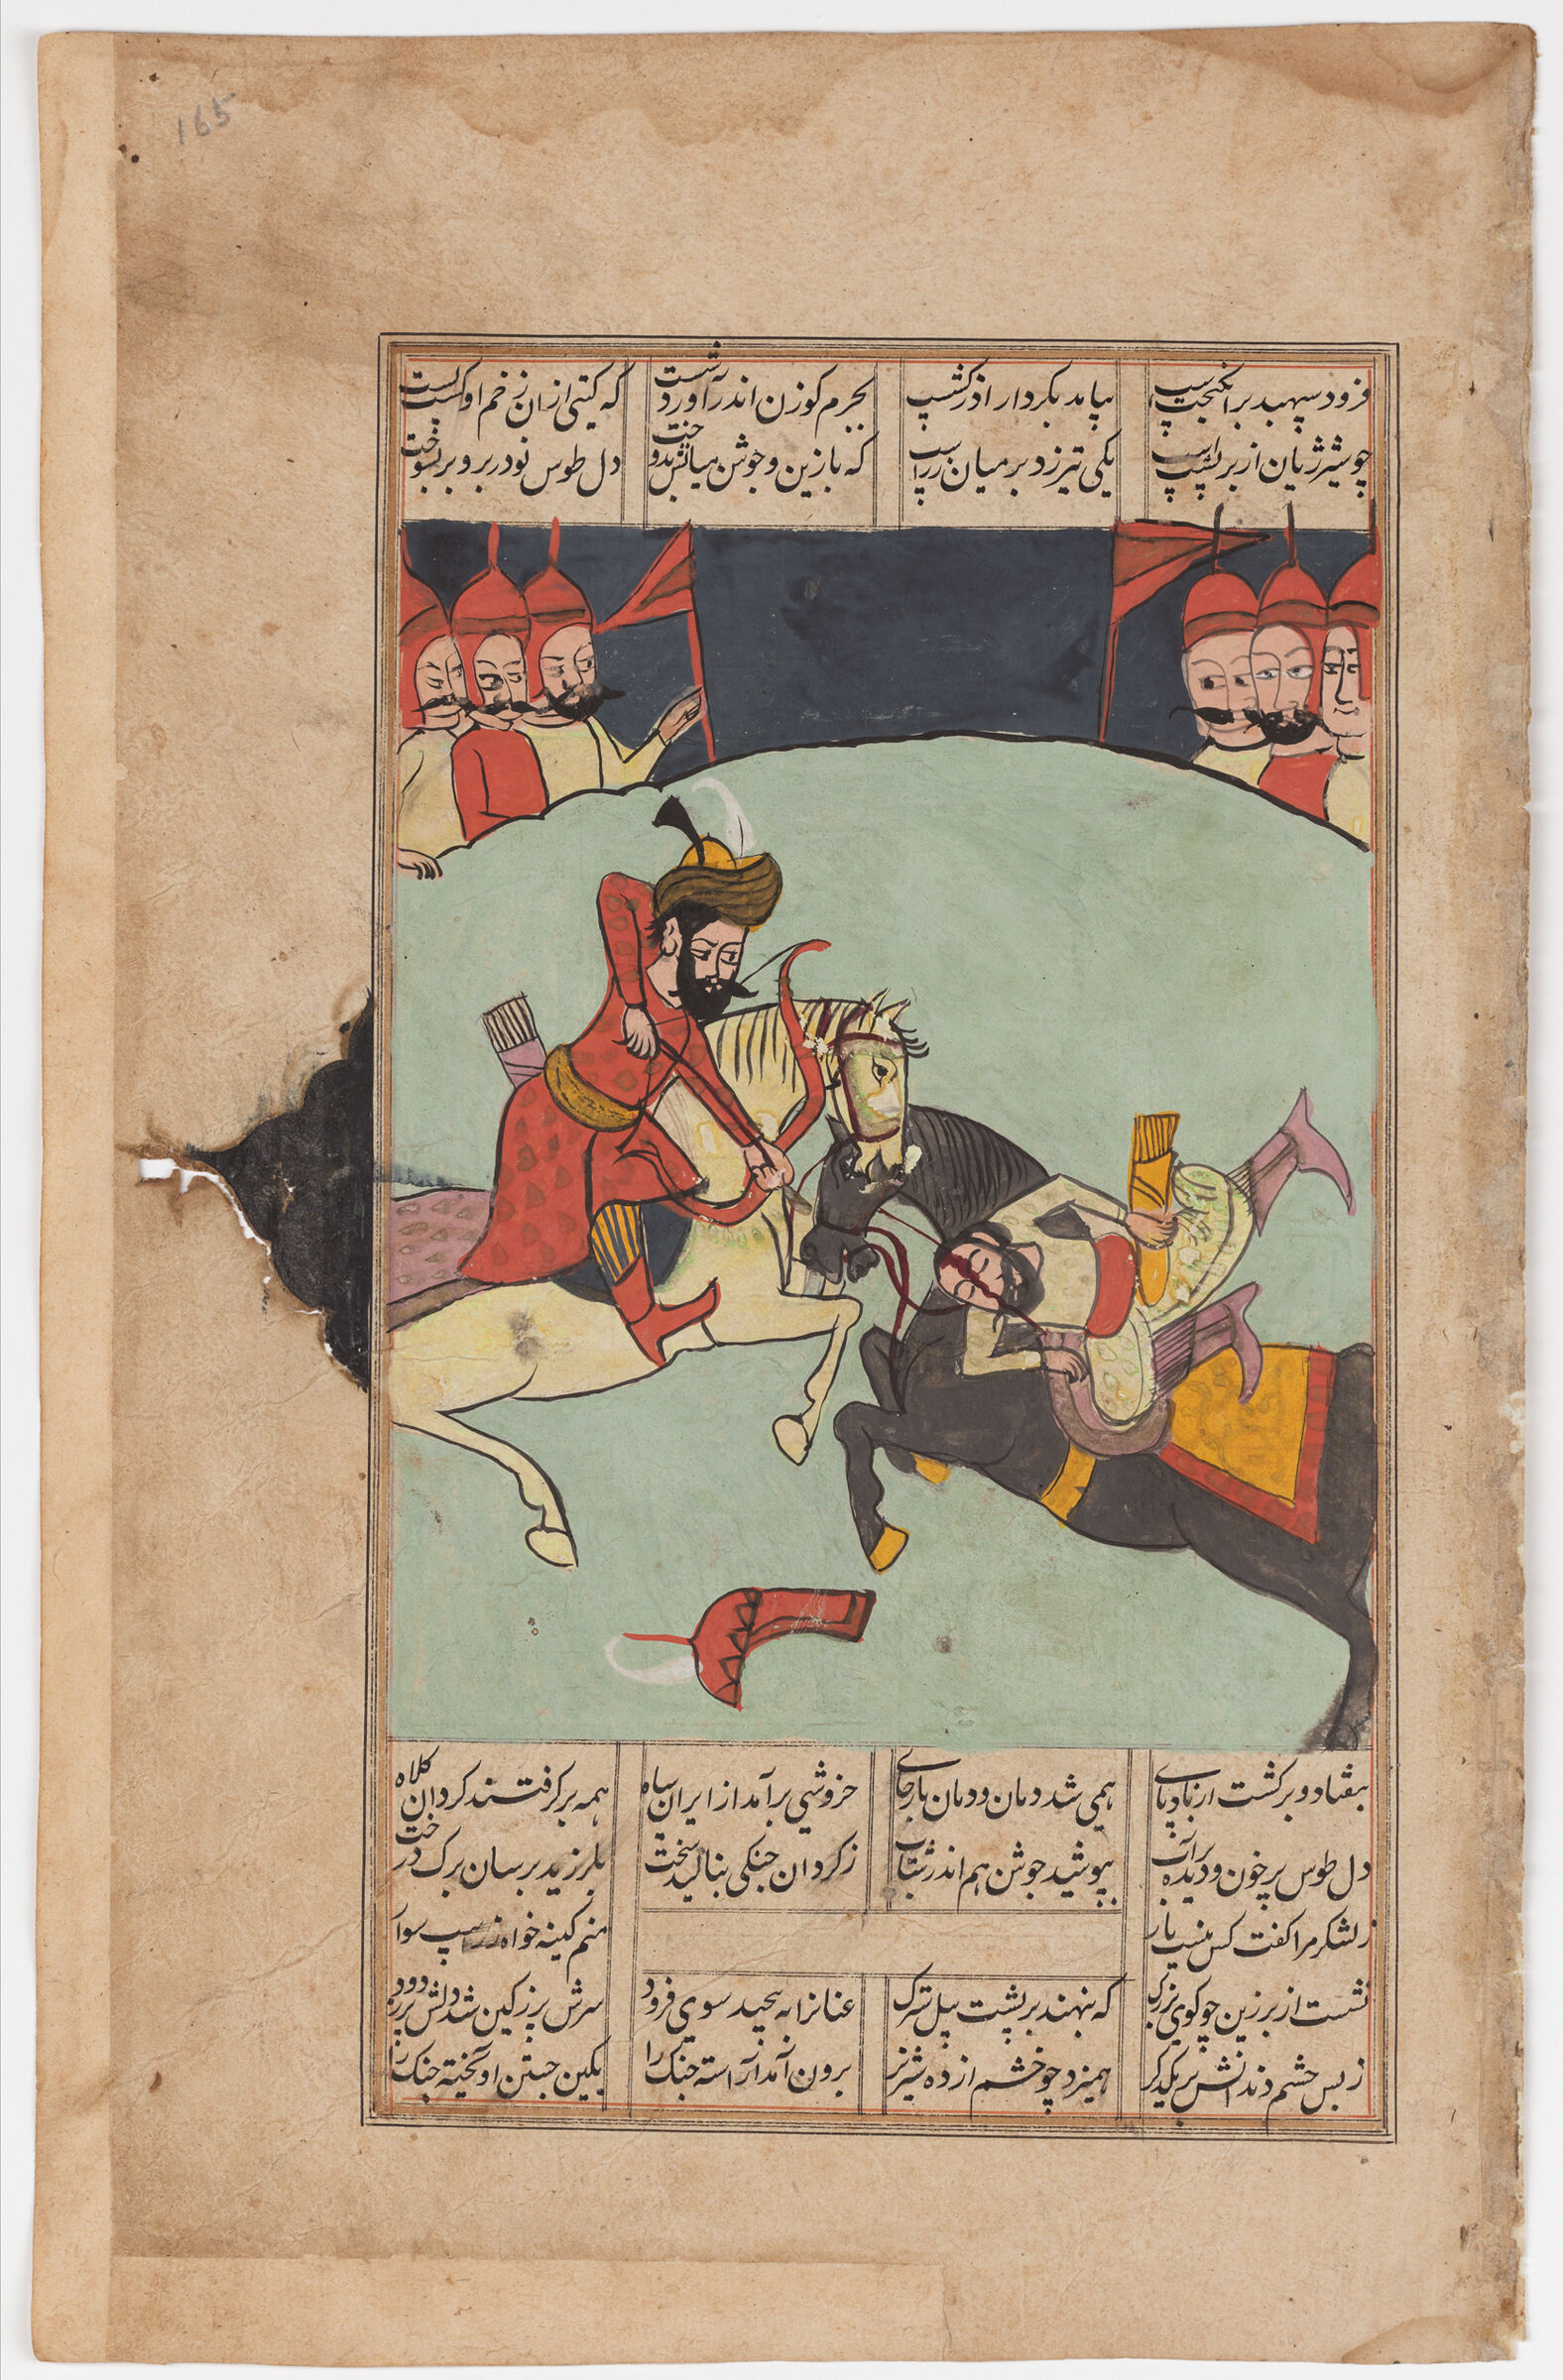 Zarasp Dies At The Hands Of Farud (Painting Recto; Text Verso Of Folio 165), Illustrated Folio From A Manuscript Of The Shahnama By Firdawsi